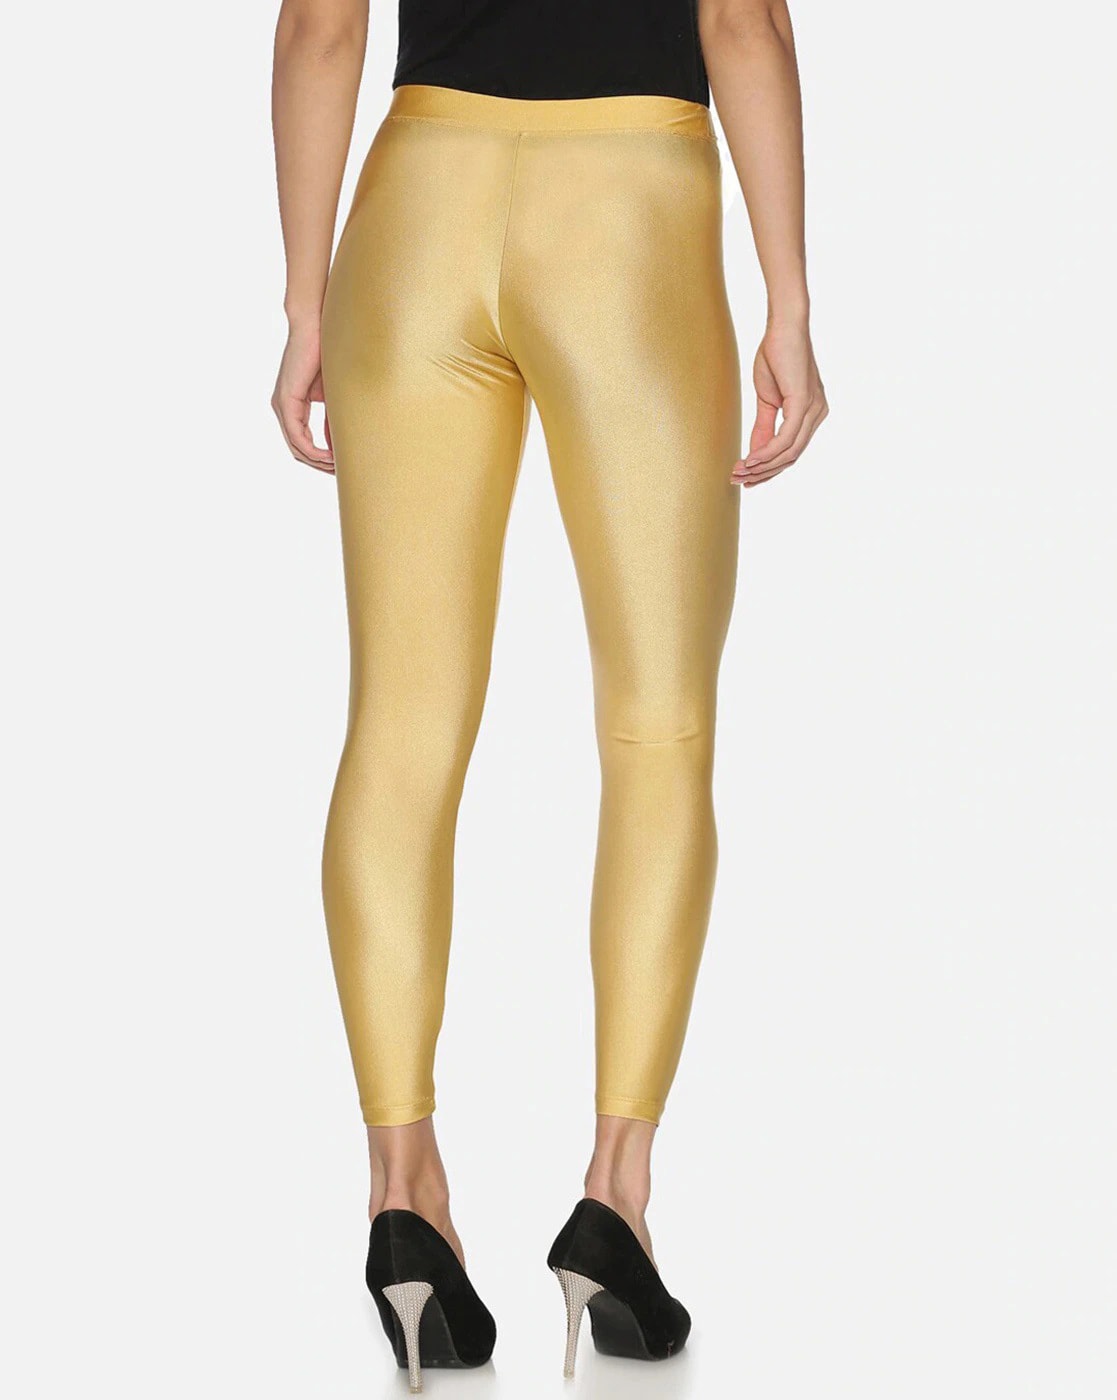 Metallic Gold Stretch Lame - Web Archived